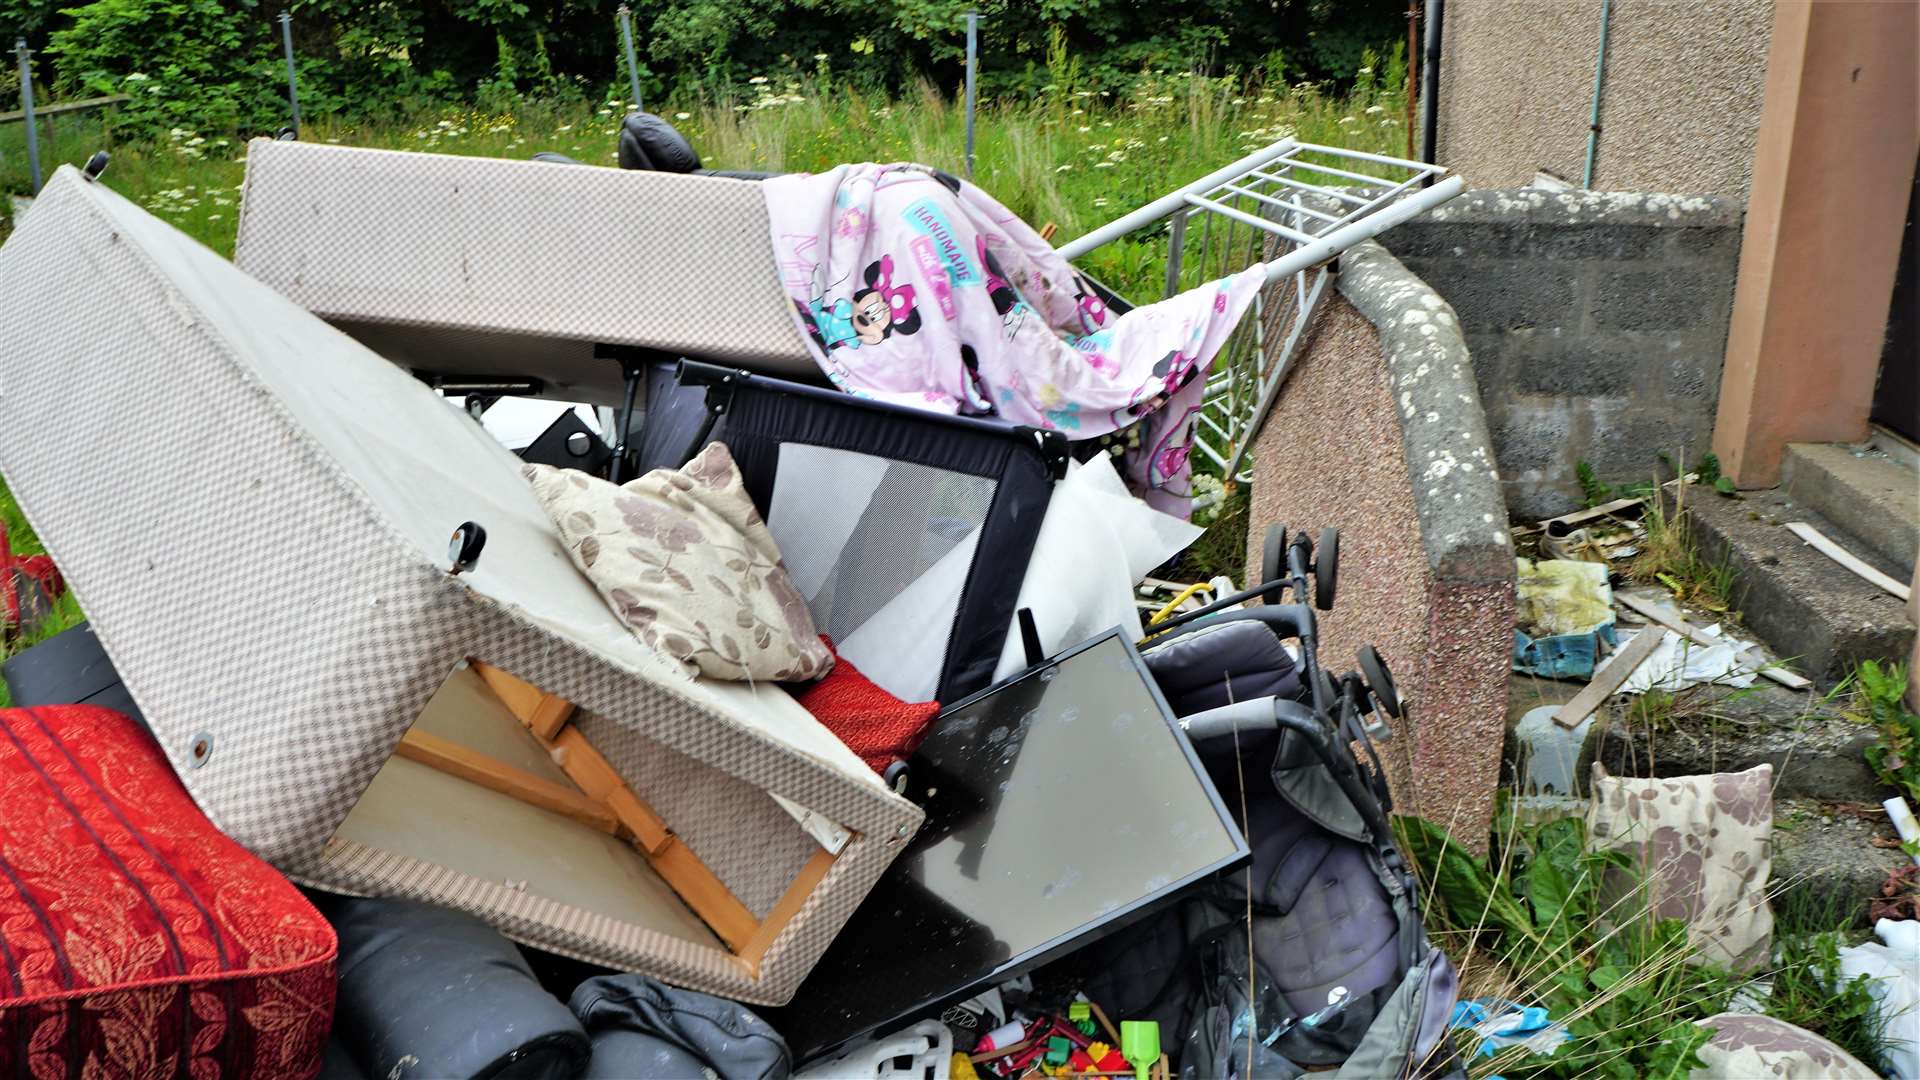 The flats at Kennedy Terrace in Wick have become a dumping ground for fly-tippers. Pictures: DGS